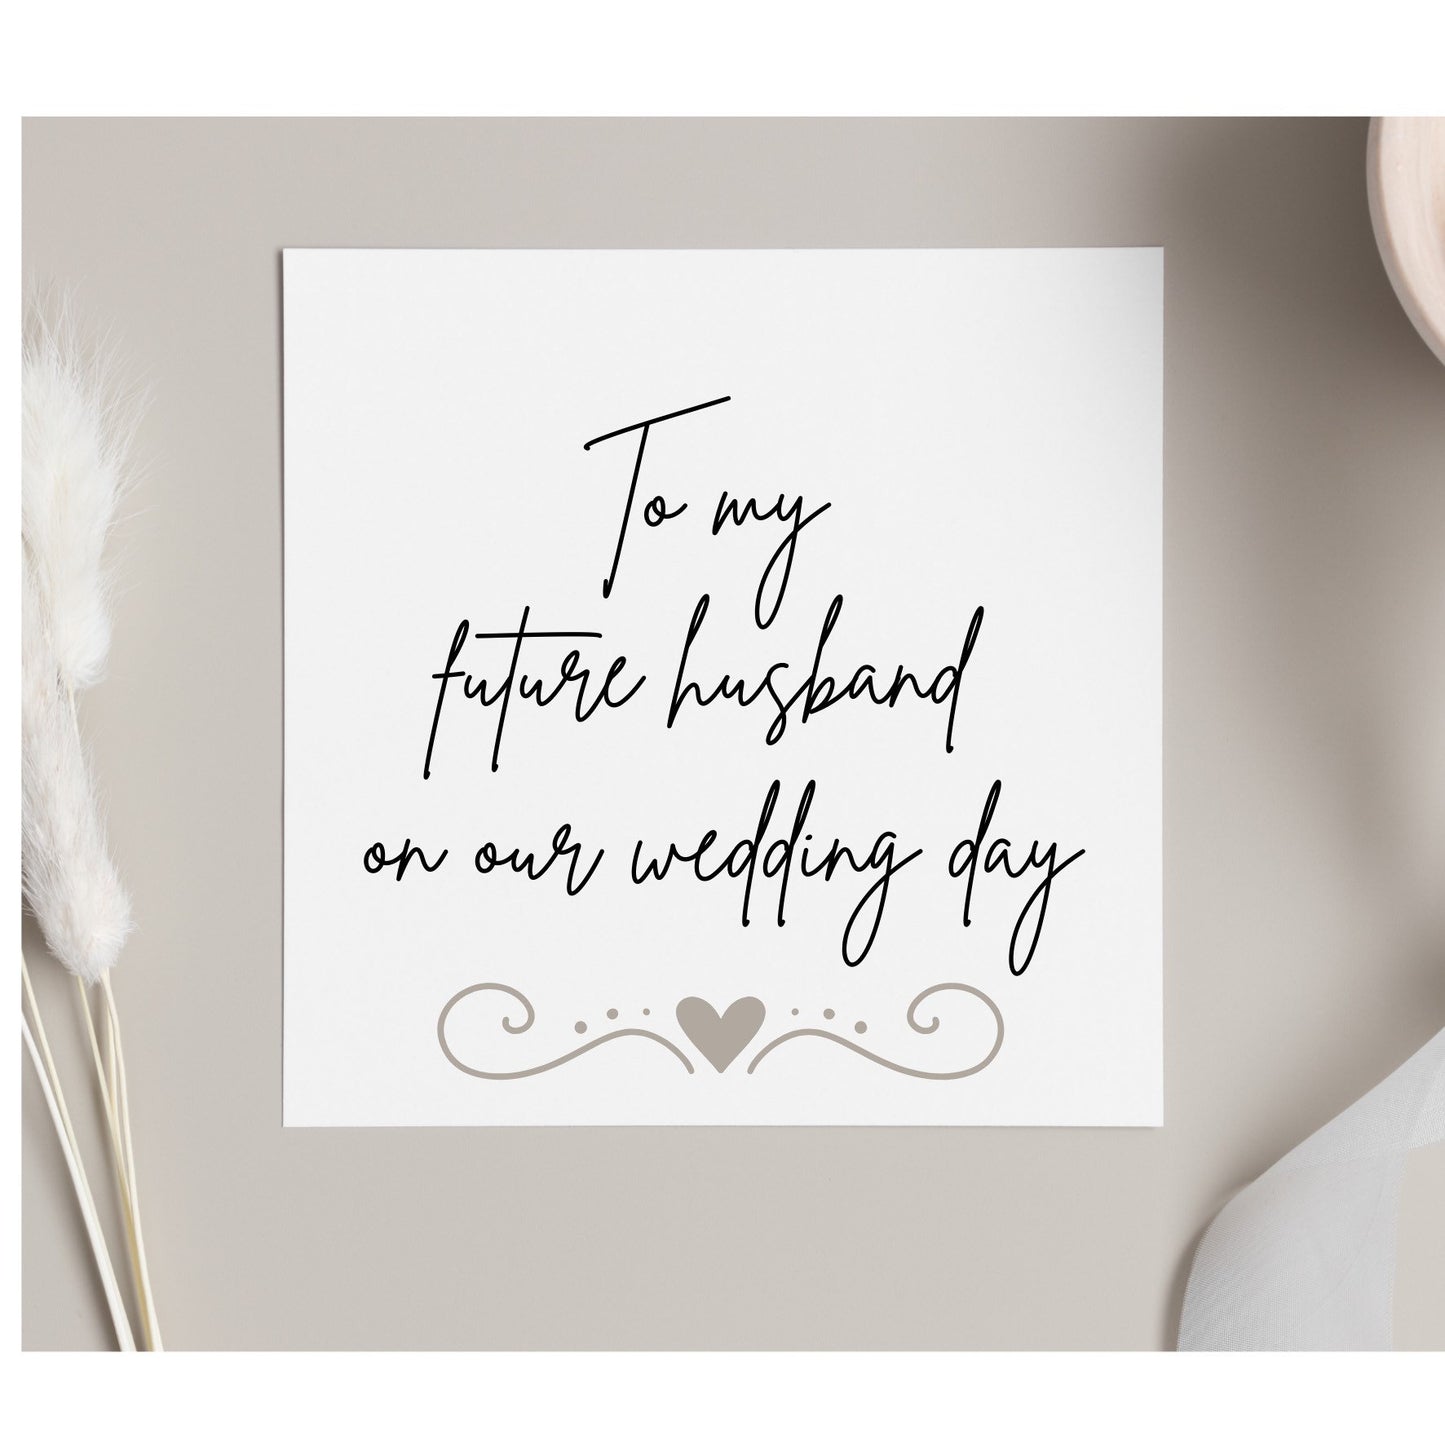 To my future husband on our wedding day card, groom wedding morning card and gift, groom cards, future hubby cards